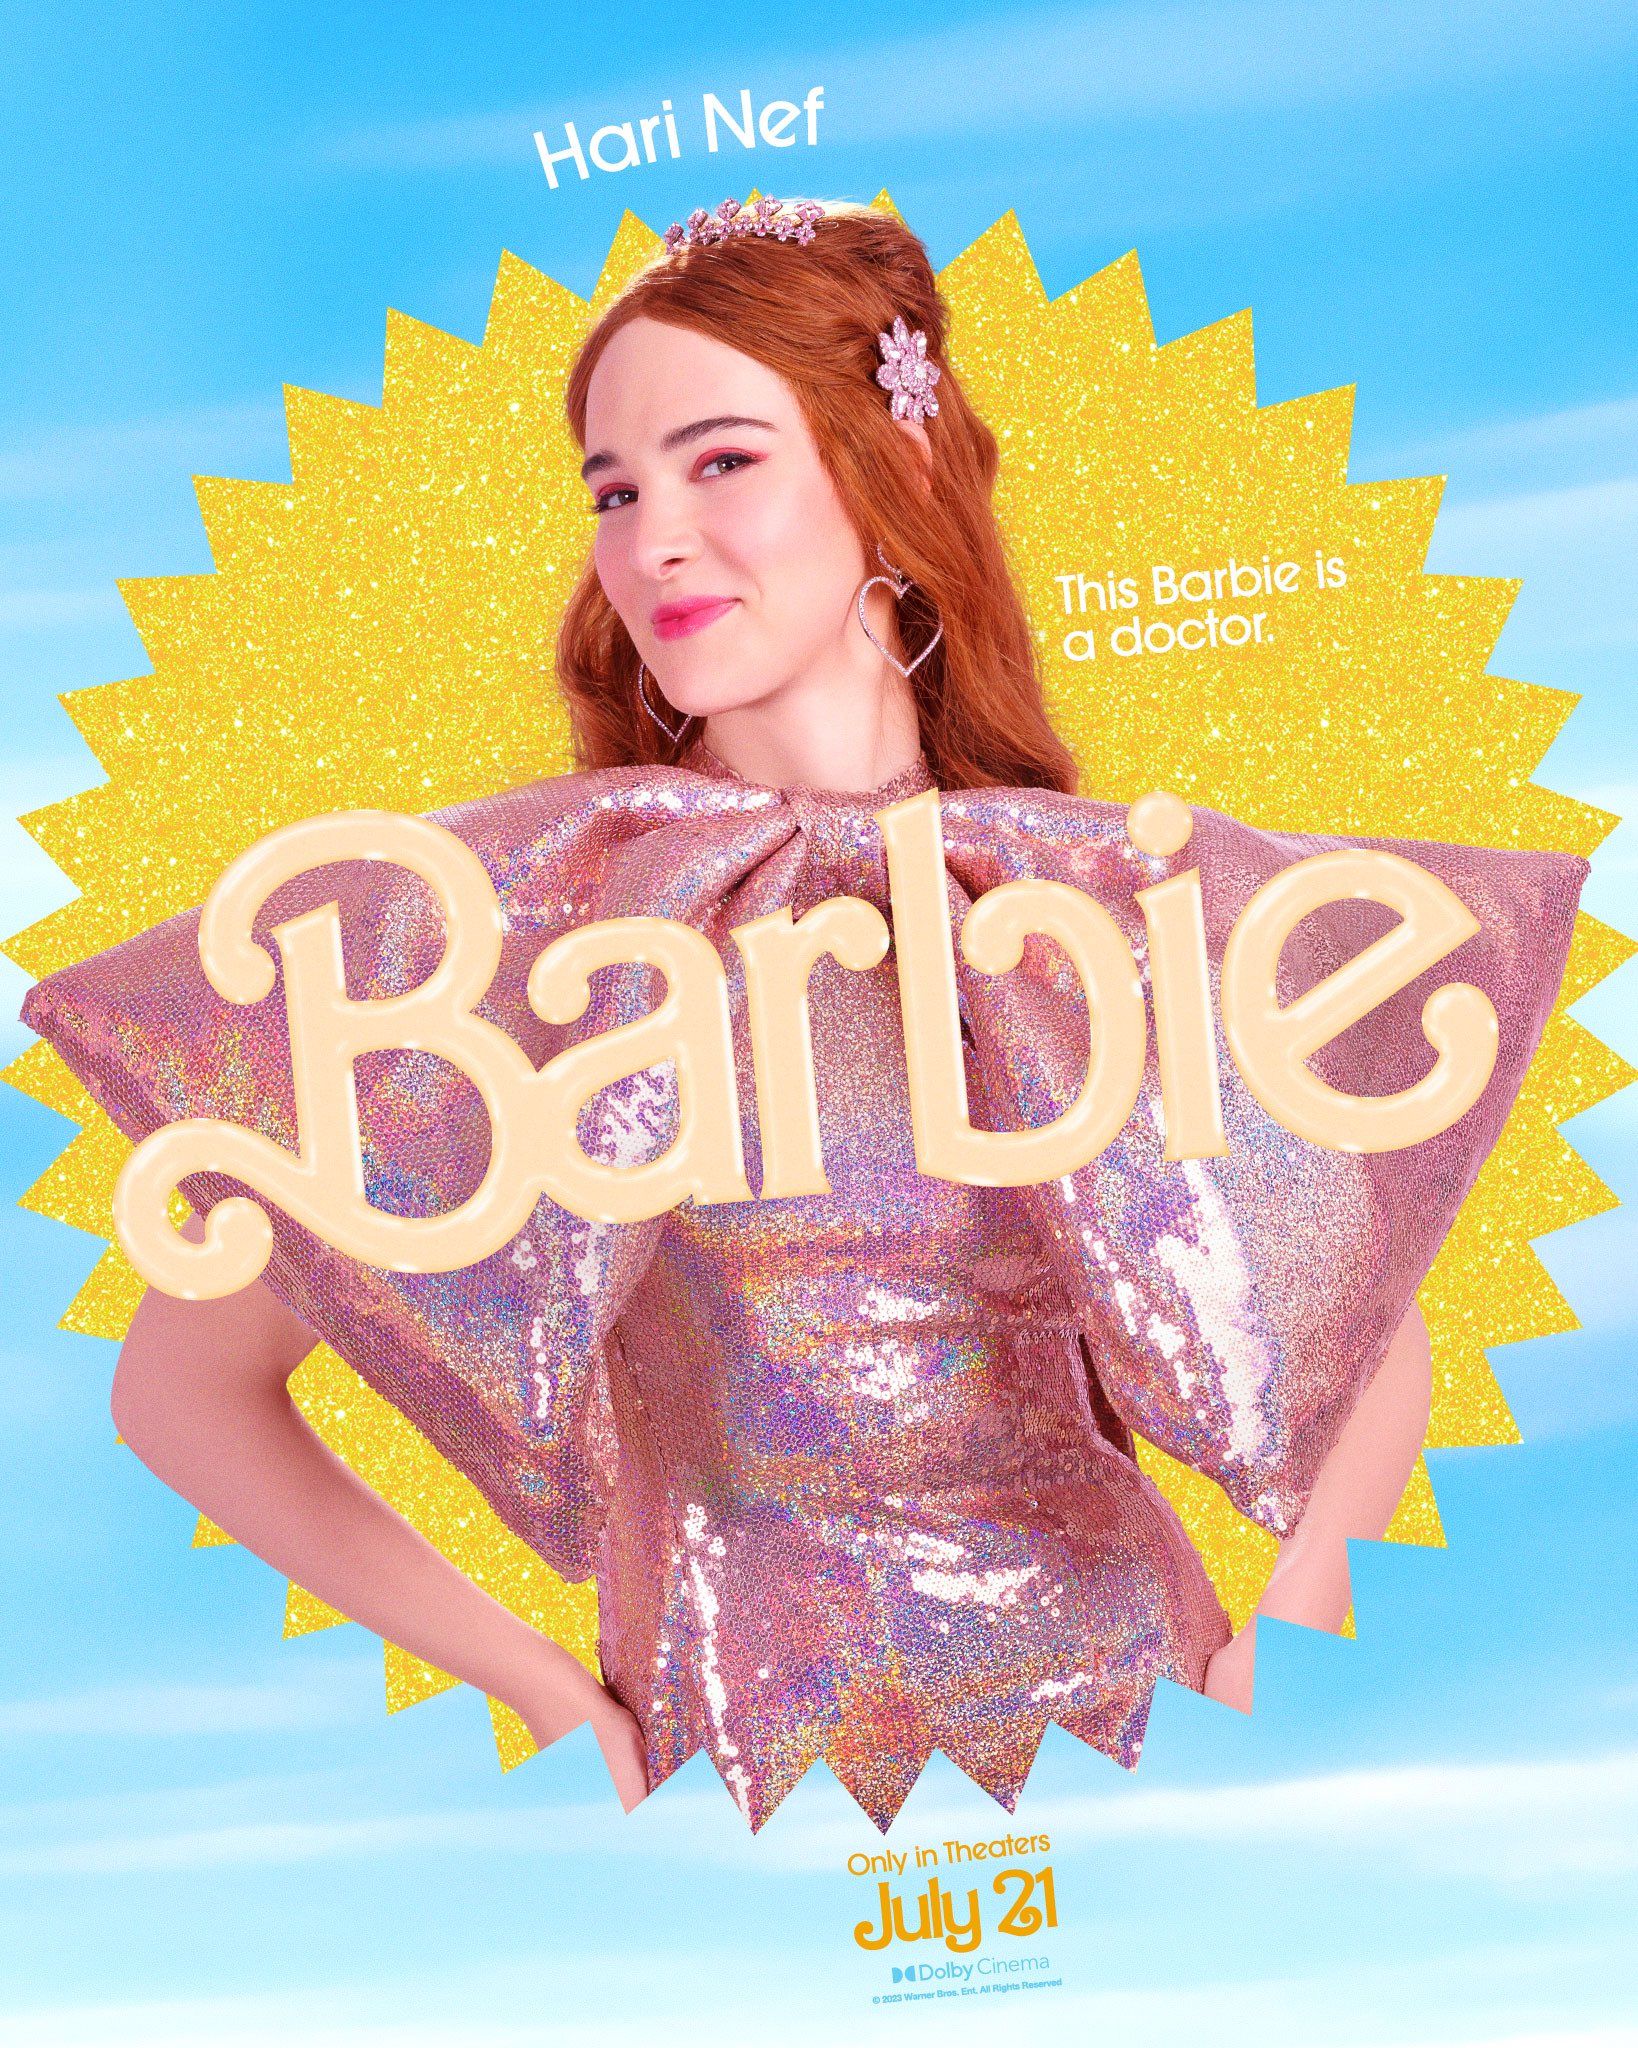 right-wing-trolls-call-for-barbie-movie-boycott-over-lgbt-actors-star